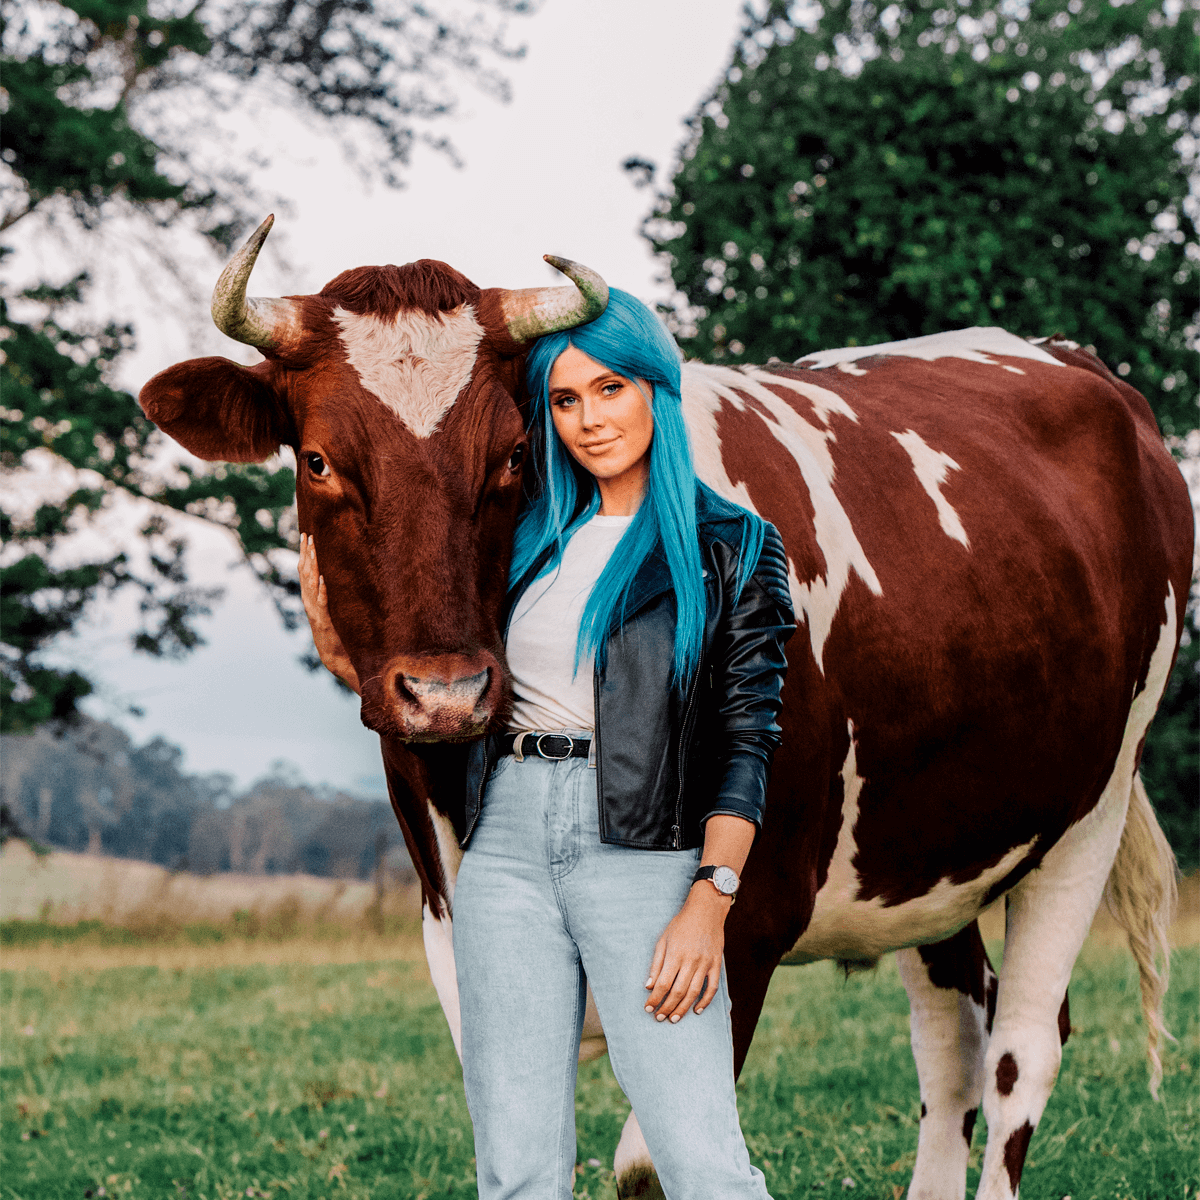 Dara Hayes, AKA DJ Tigerlily, with rescue cow (image by Noah Hannibal)